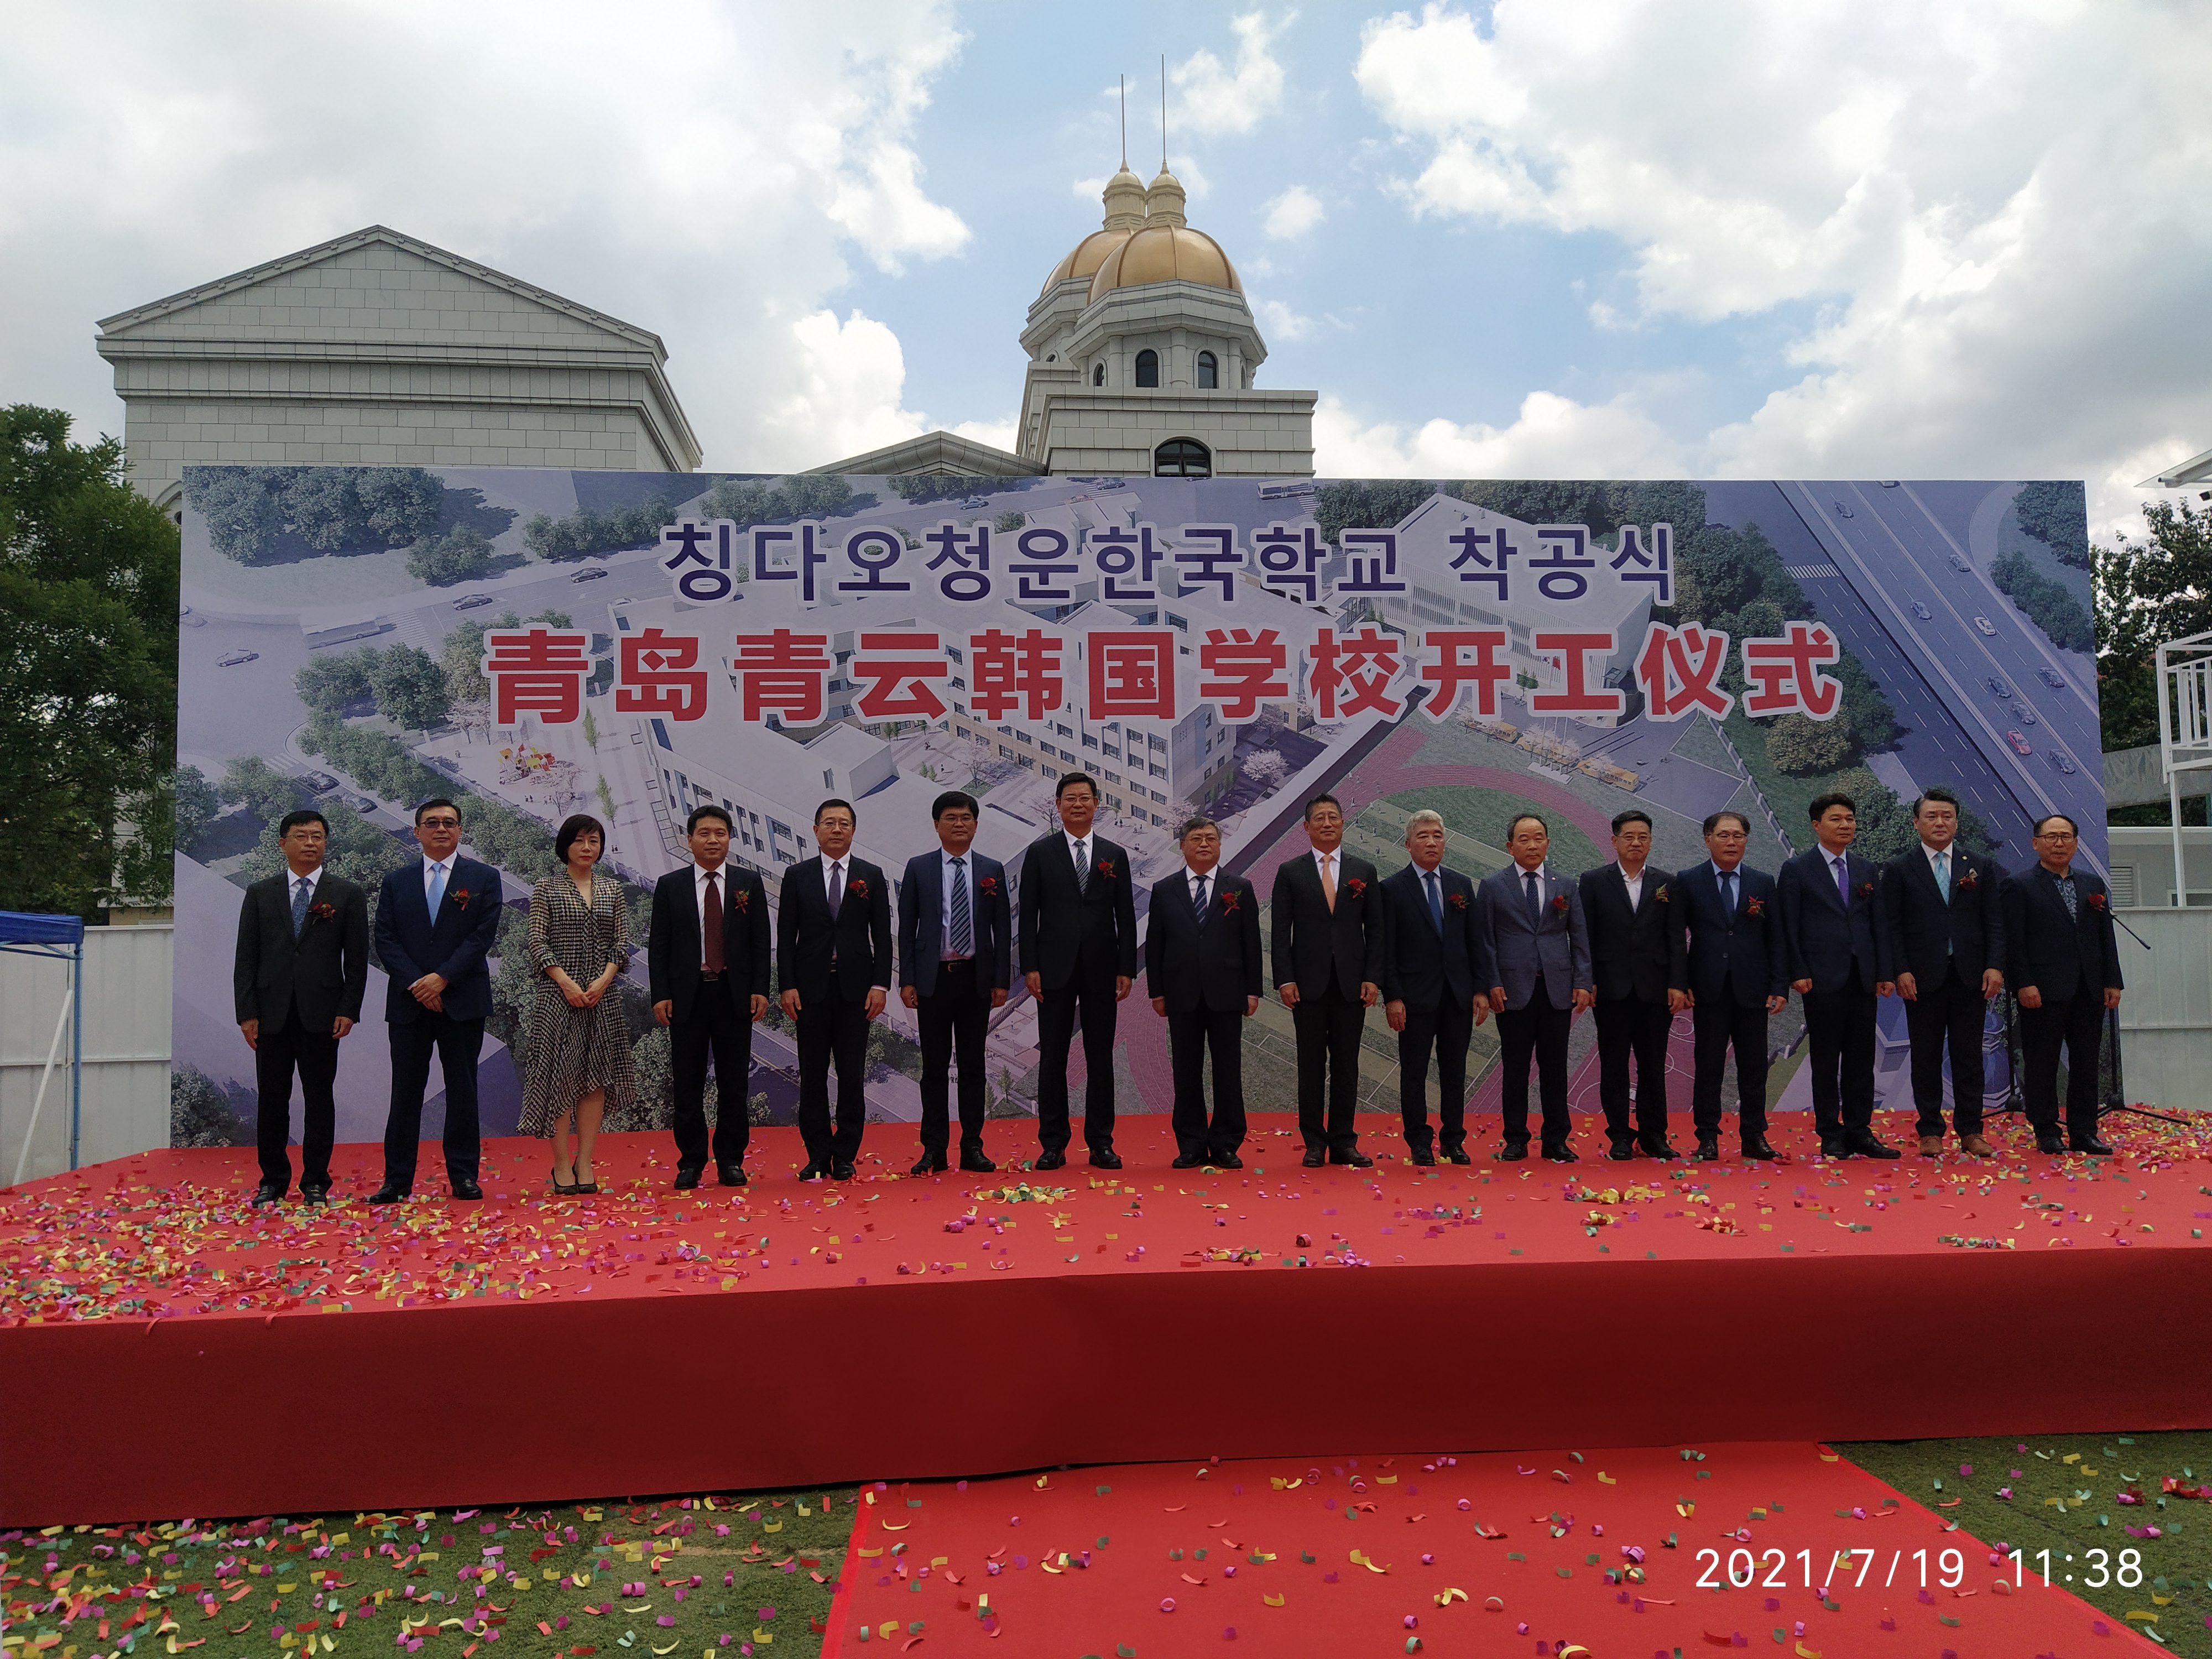 Chungwoon Korean School’s Groundbreaking Ceremony (provided by the Qingdao Korean (Business) Community)